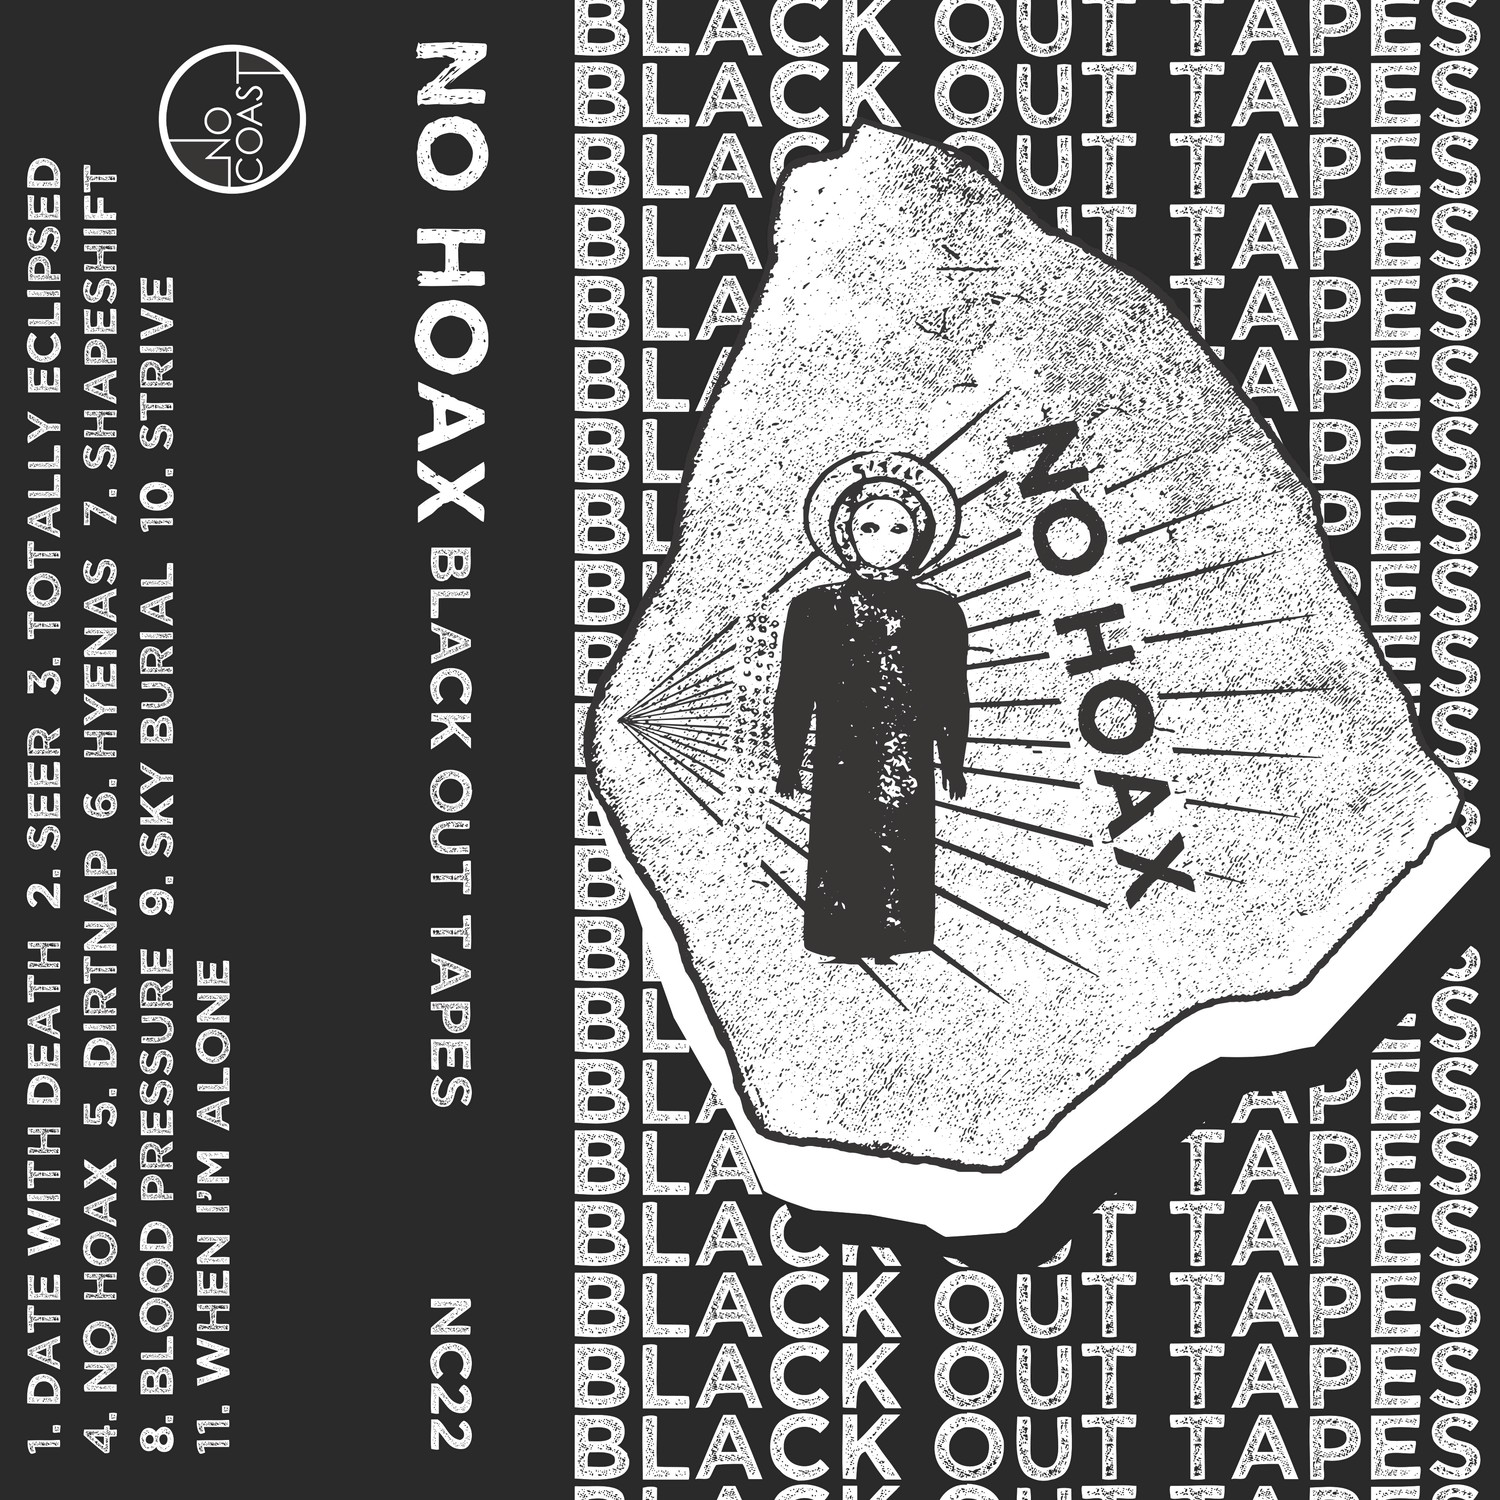 Black Out Tapes